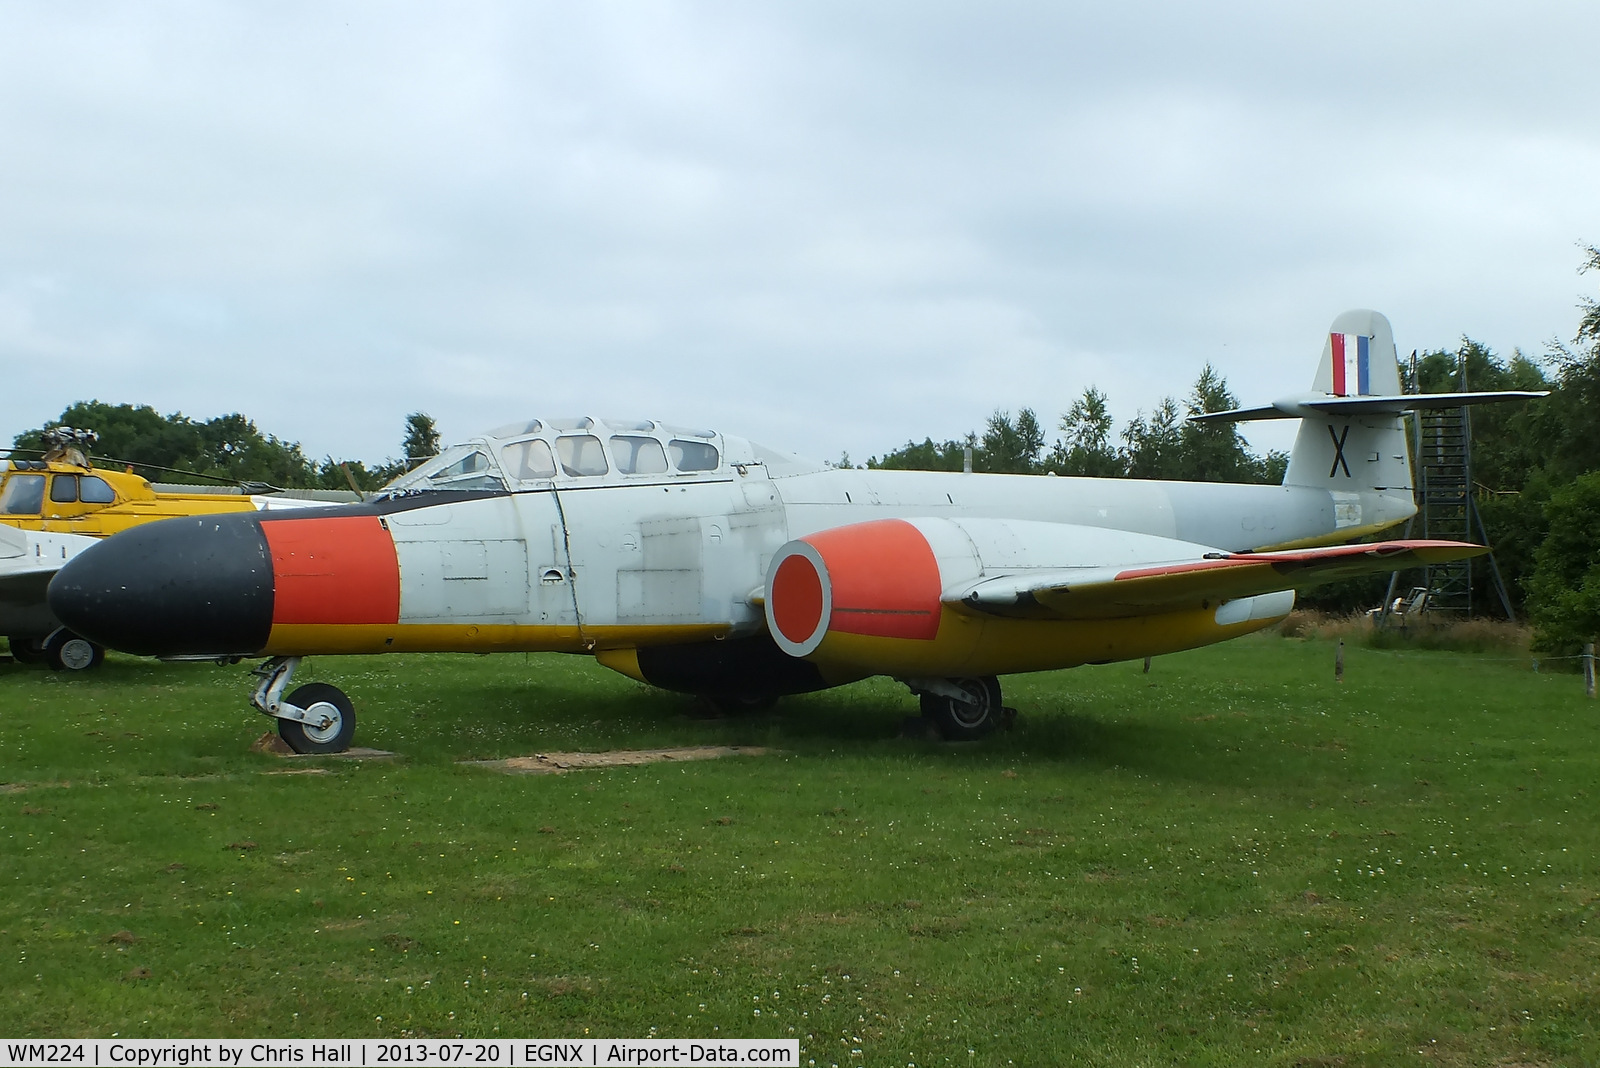 WM224, 1952 Gloster Meteor TT.20 C/N Not found WM224, Preserved at the East Midlands Aeropark